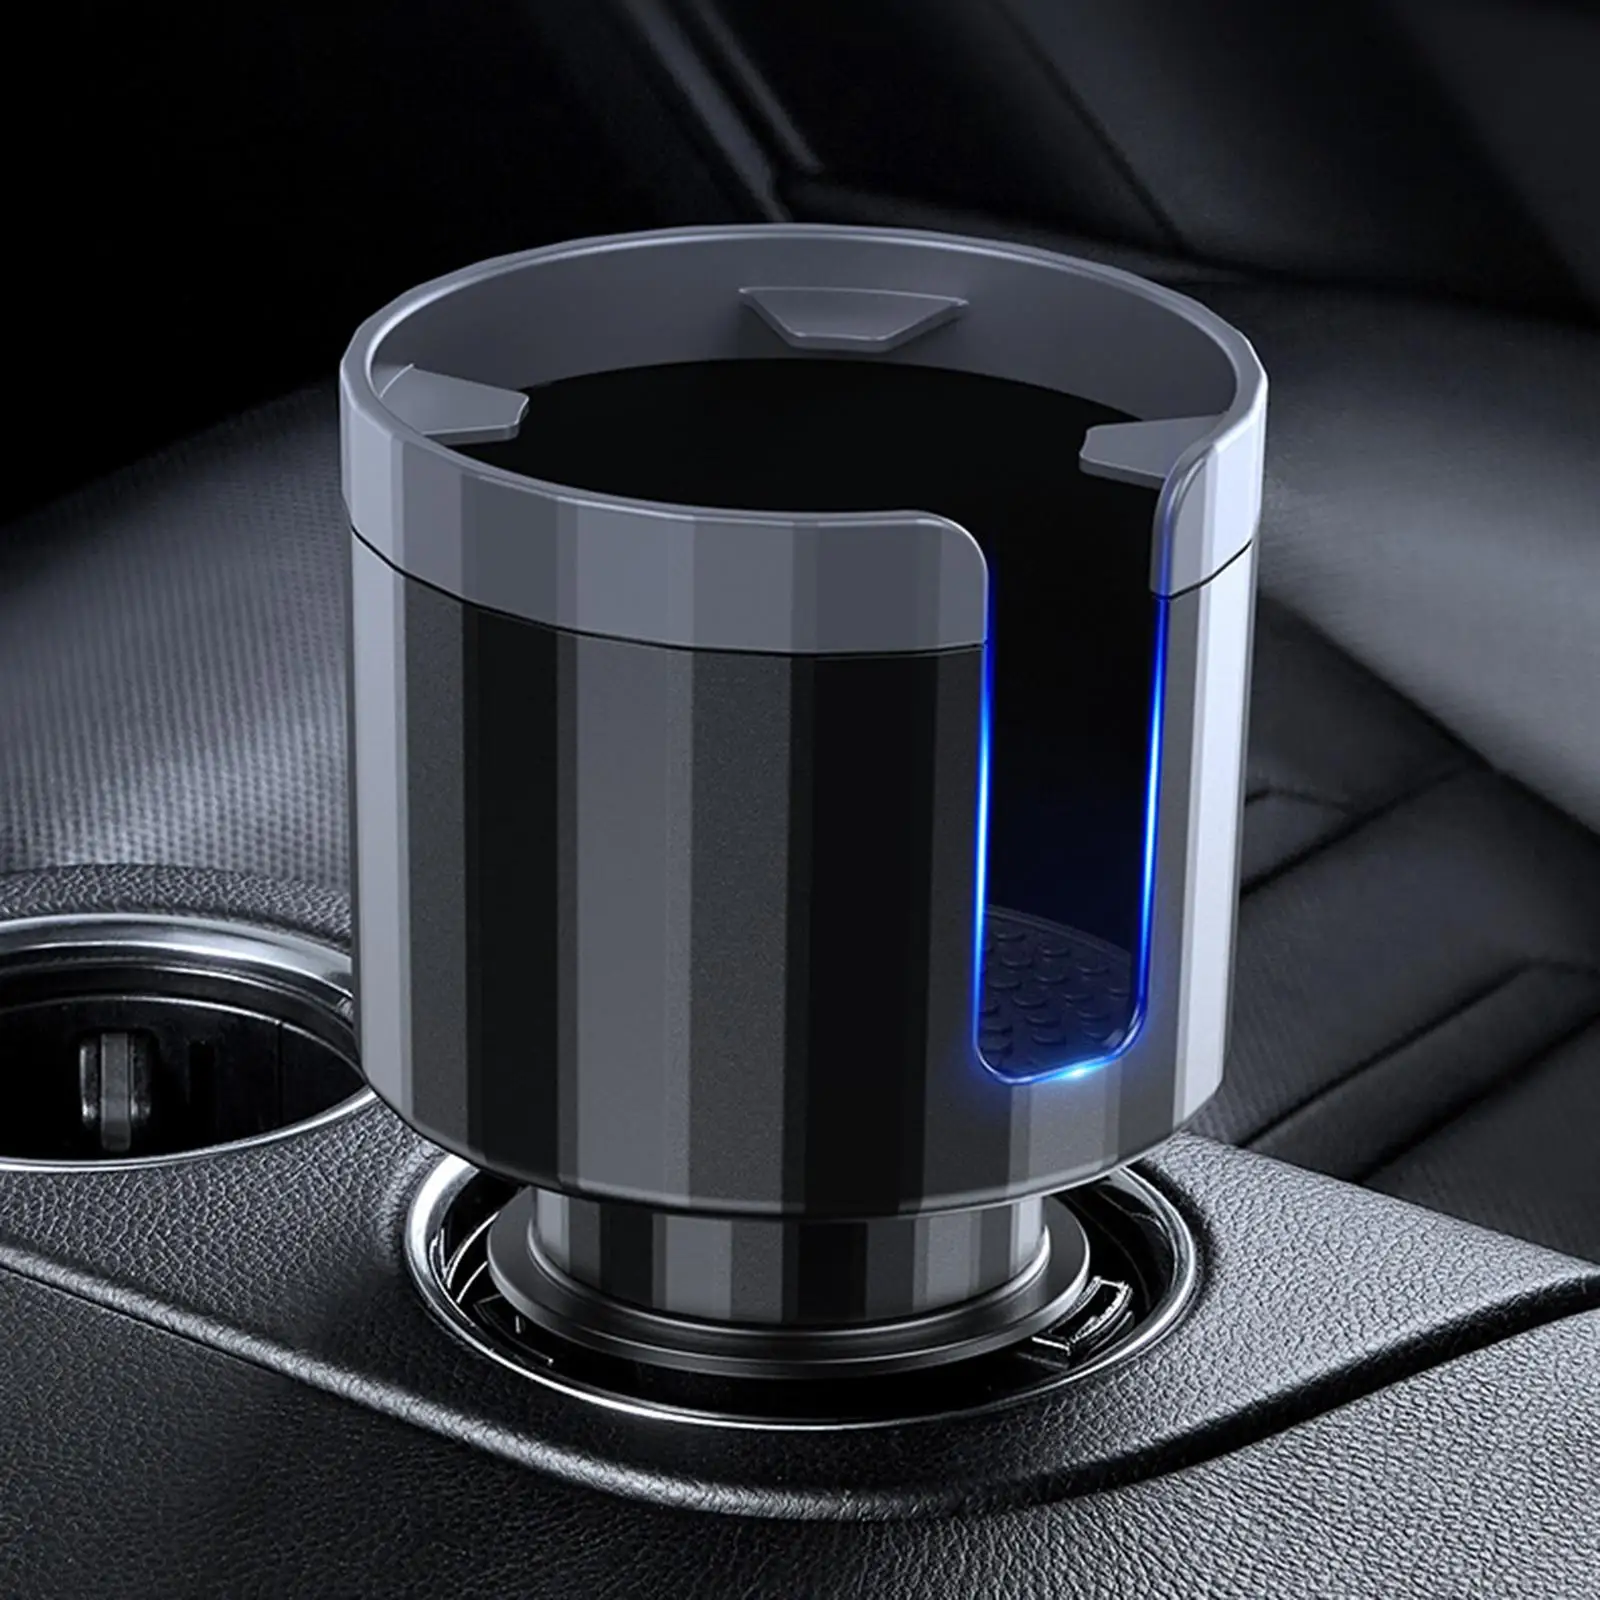 Car Cup Holder Expander Adapter Water Cup Holder Car Water Drink Holder Cup Holder Insert Fit for Cups Drinks Durable Accessory